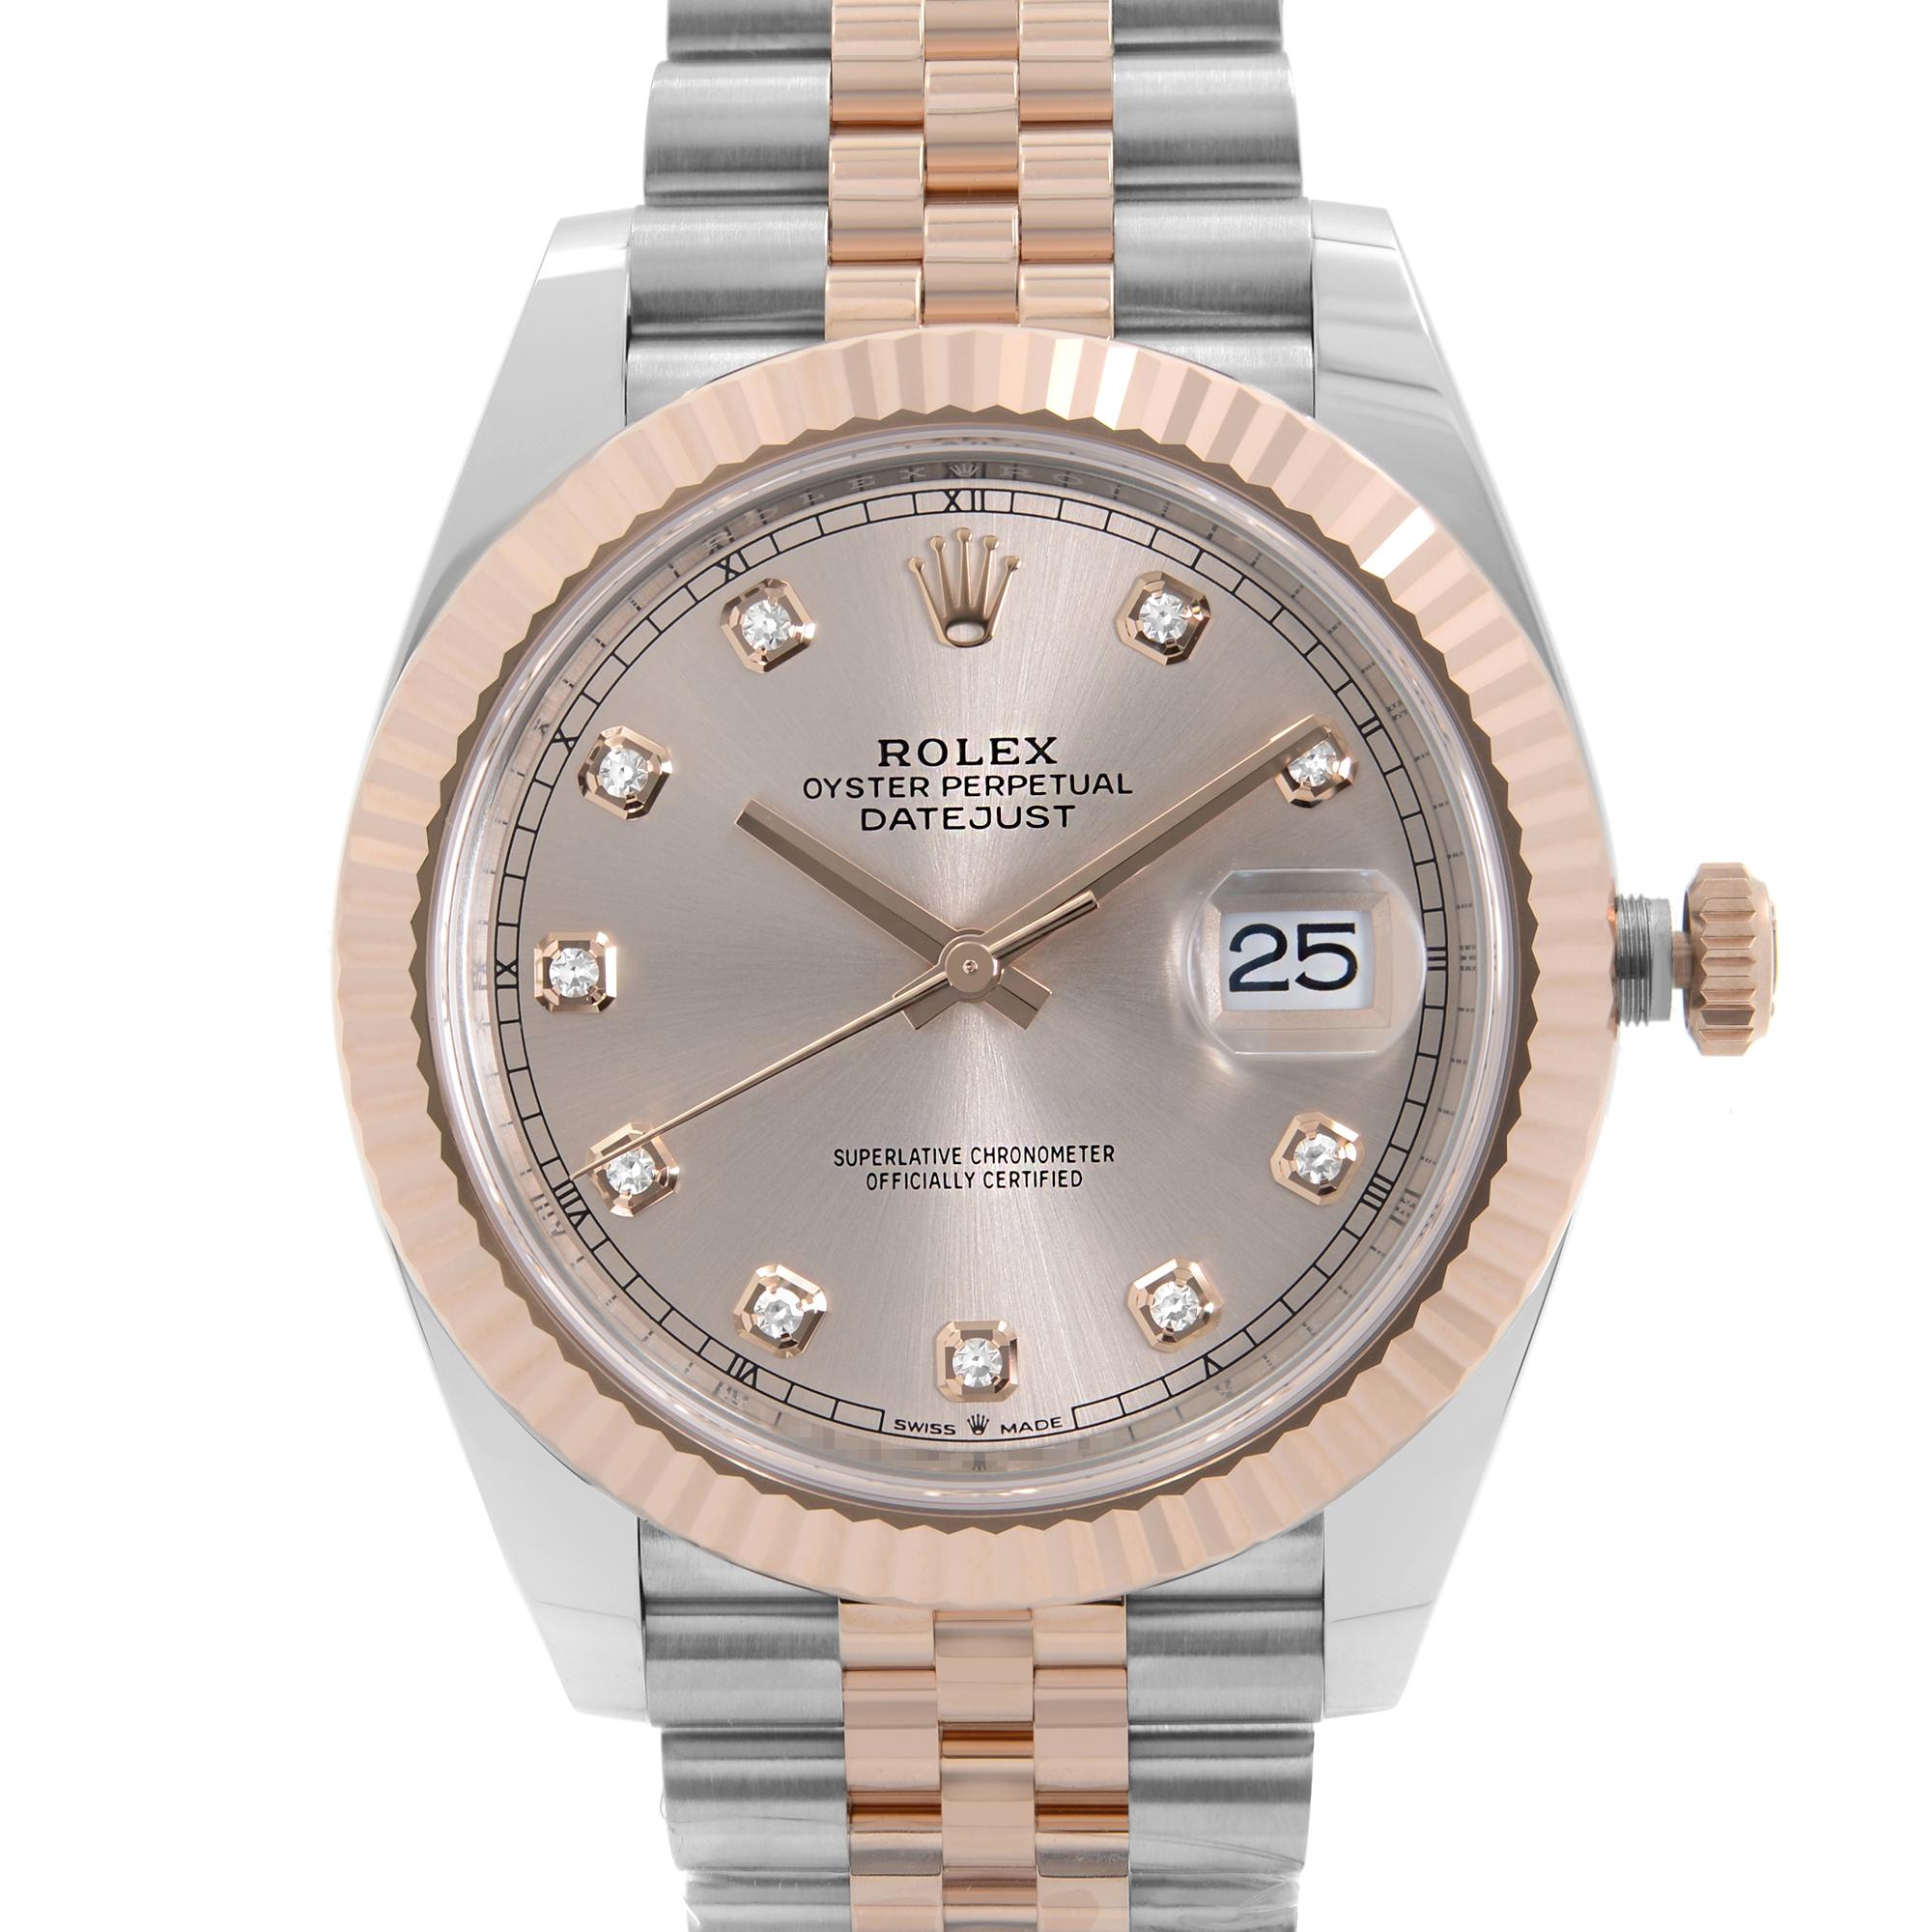 Unworn. 2022-2023 Card. Comes with the original box and papers.

Brand: Rolex
Model: Rolex Datejust
Model Number: 126331
Movement: Mechanical (Automatic)
Origin: Made in Switzerland
Style: Dress/Formal, Luxury
Vintage: No
Year Manufactured: